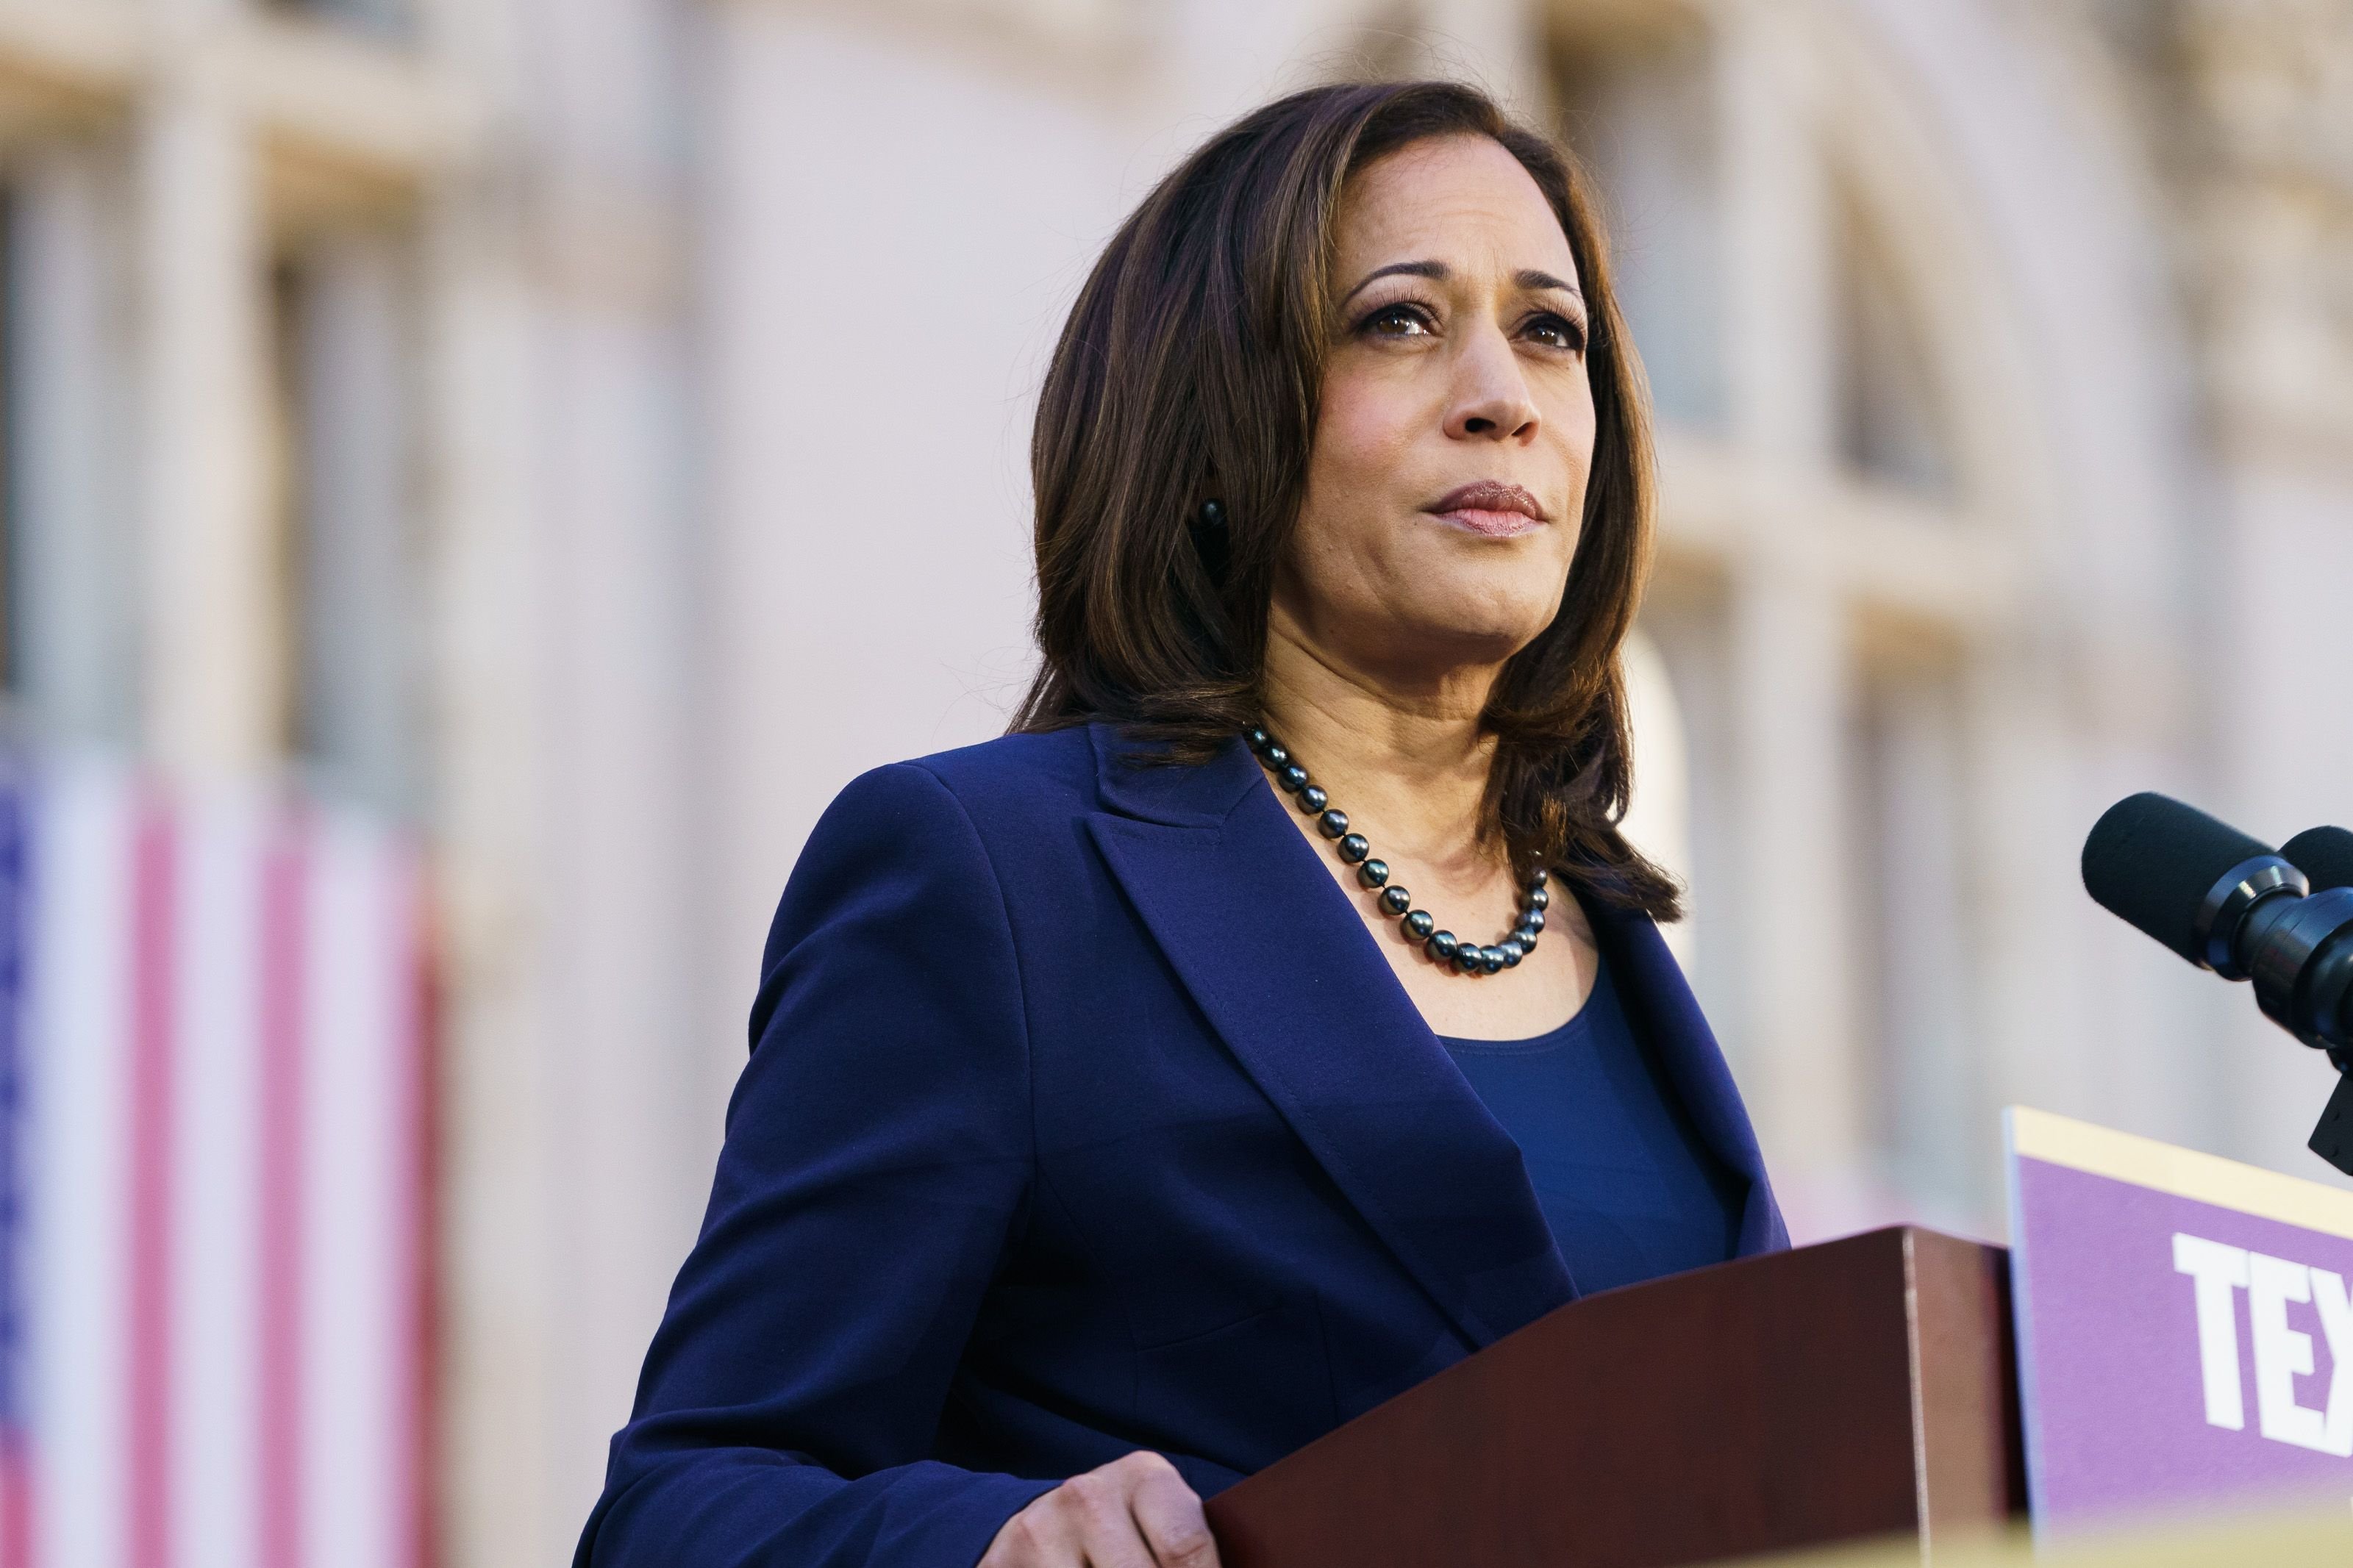 Kamala Harris spoke to her supporters at her presidential campaign launch rally in Frank H. Ogawa Plaza on January 27, 2019 | Photo: Getty Images